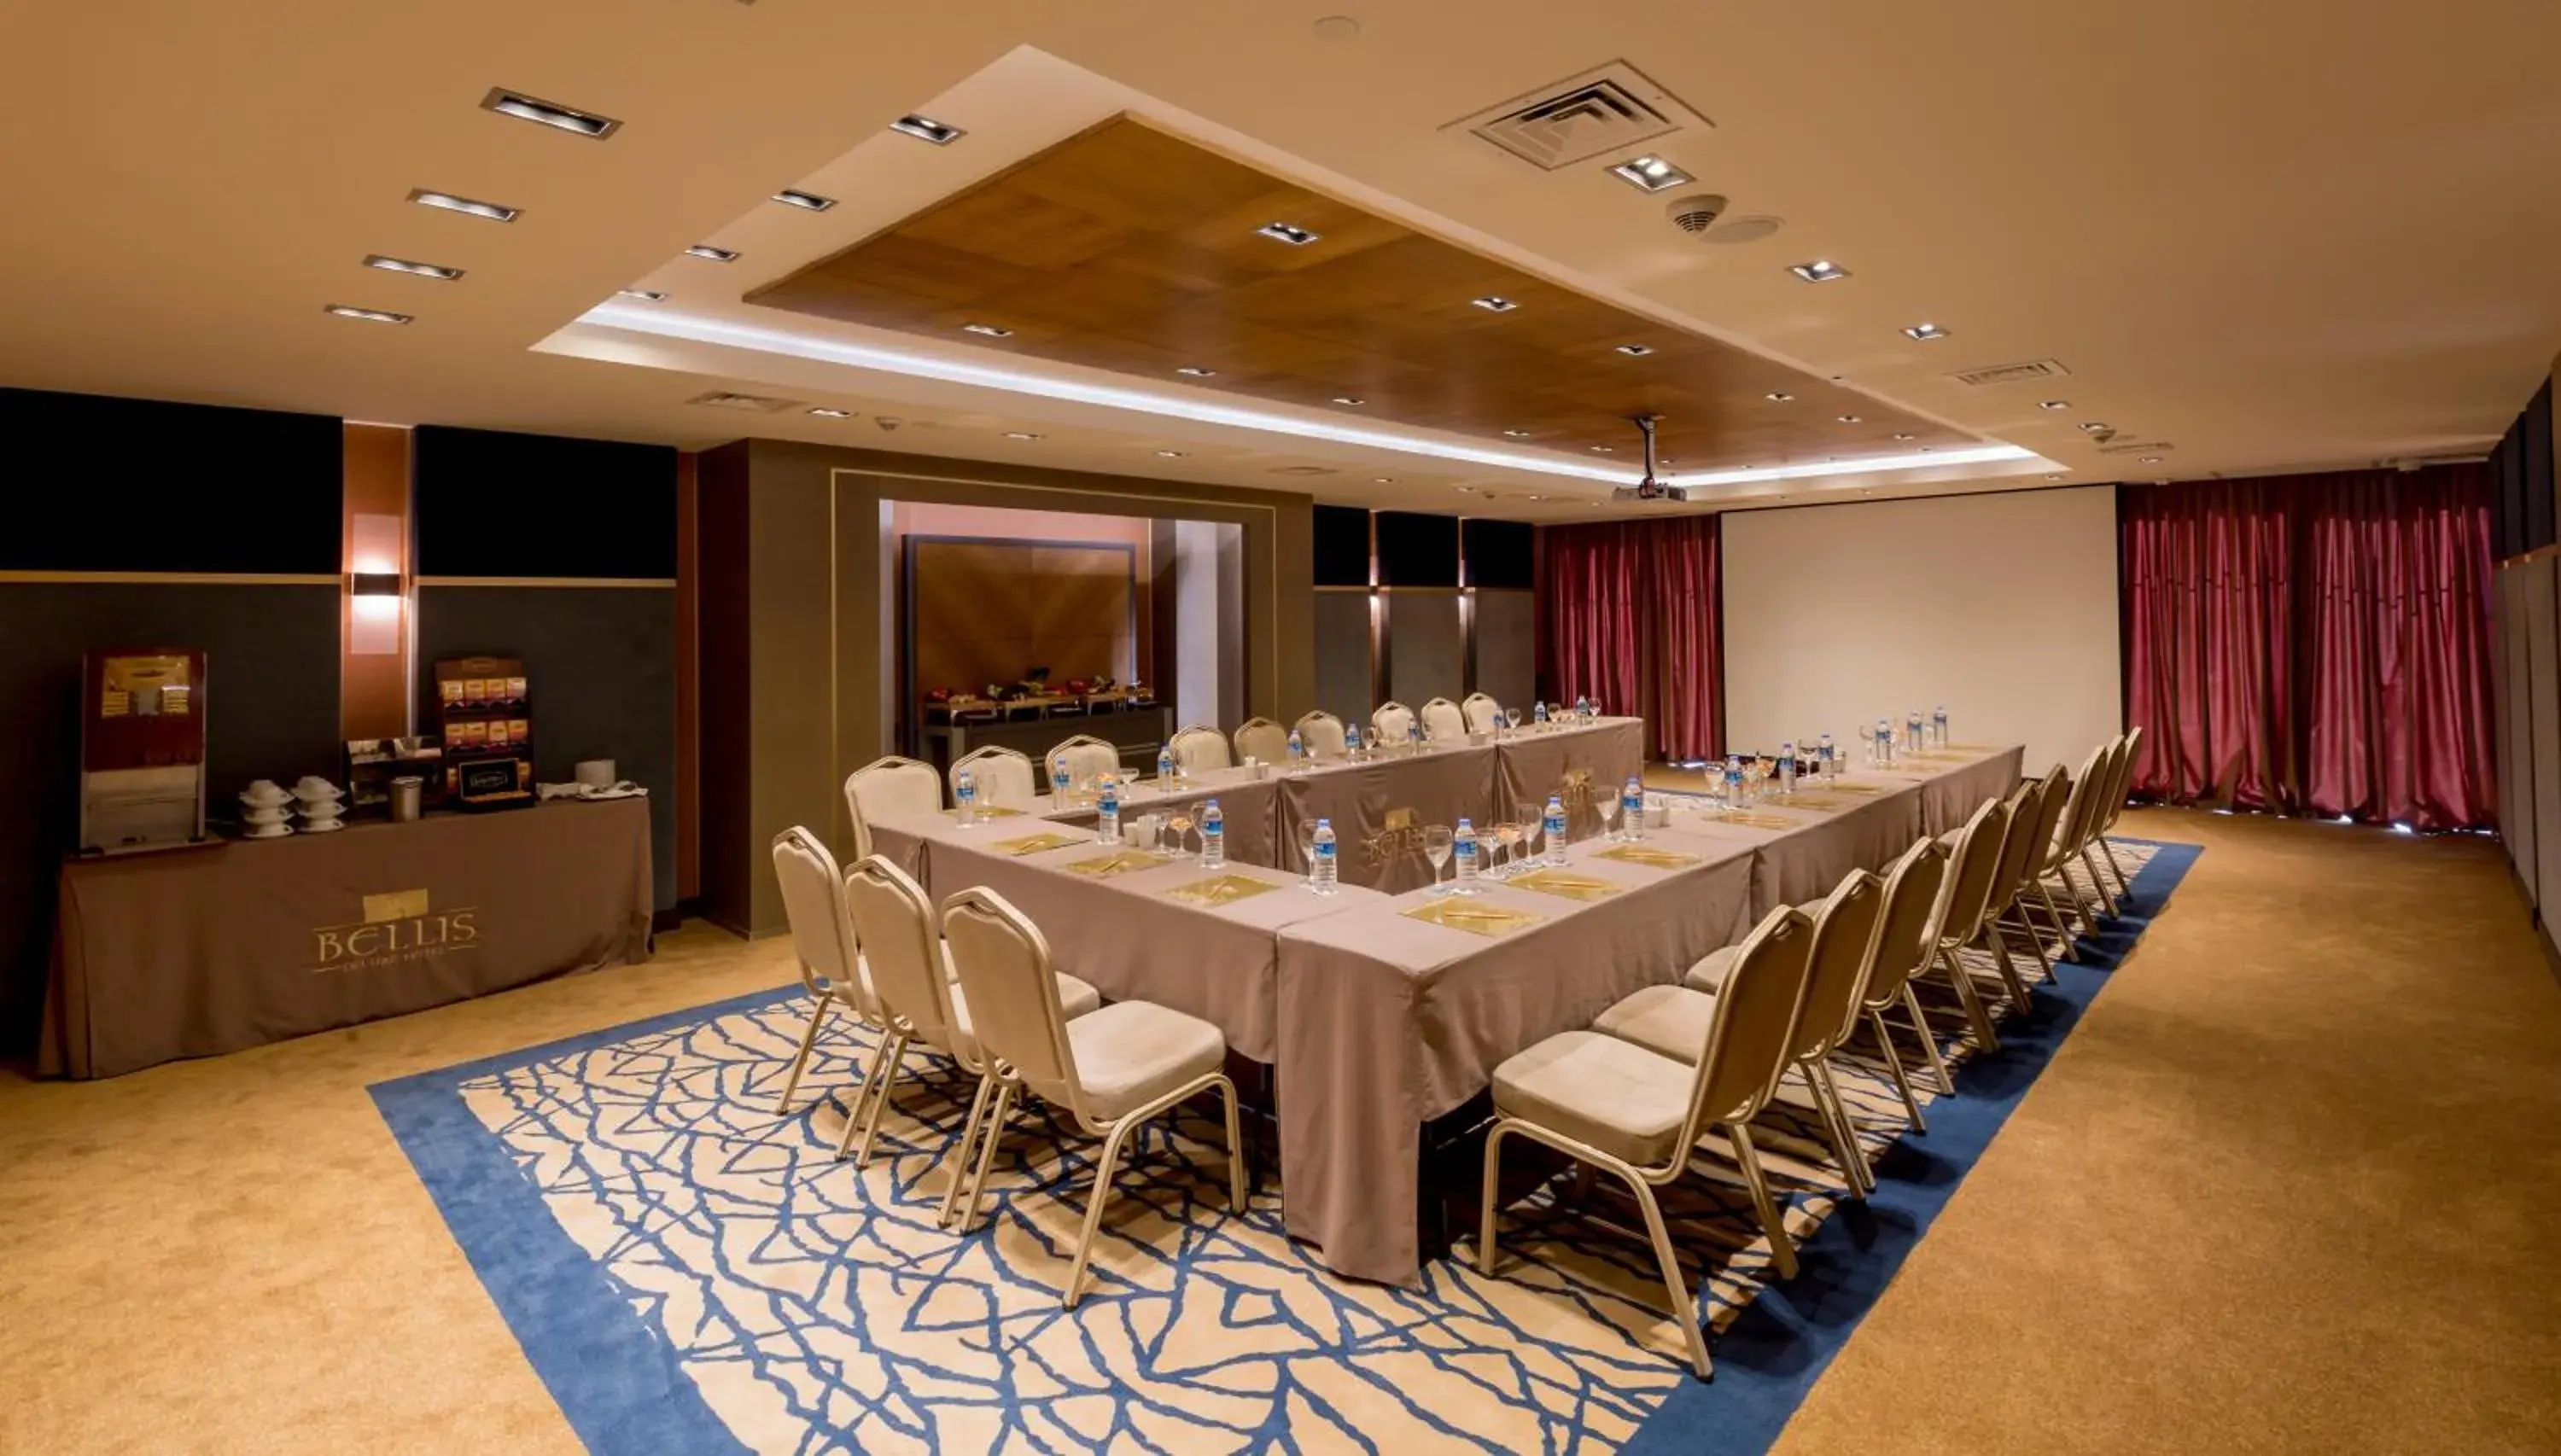 Meeting/conference room, Business Area/Conference Room in Bellis Deluxe Hotel